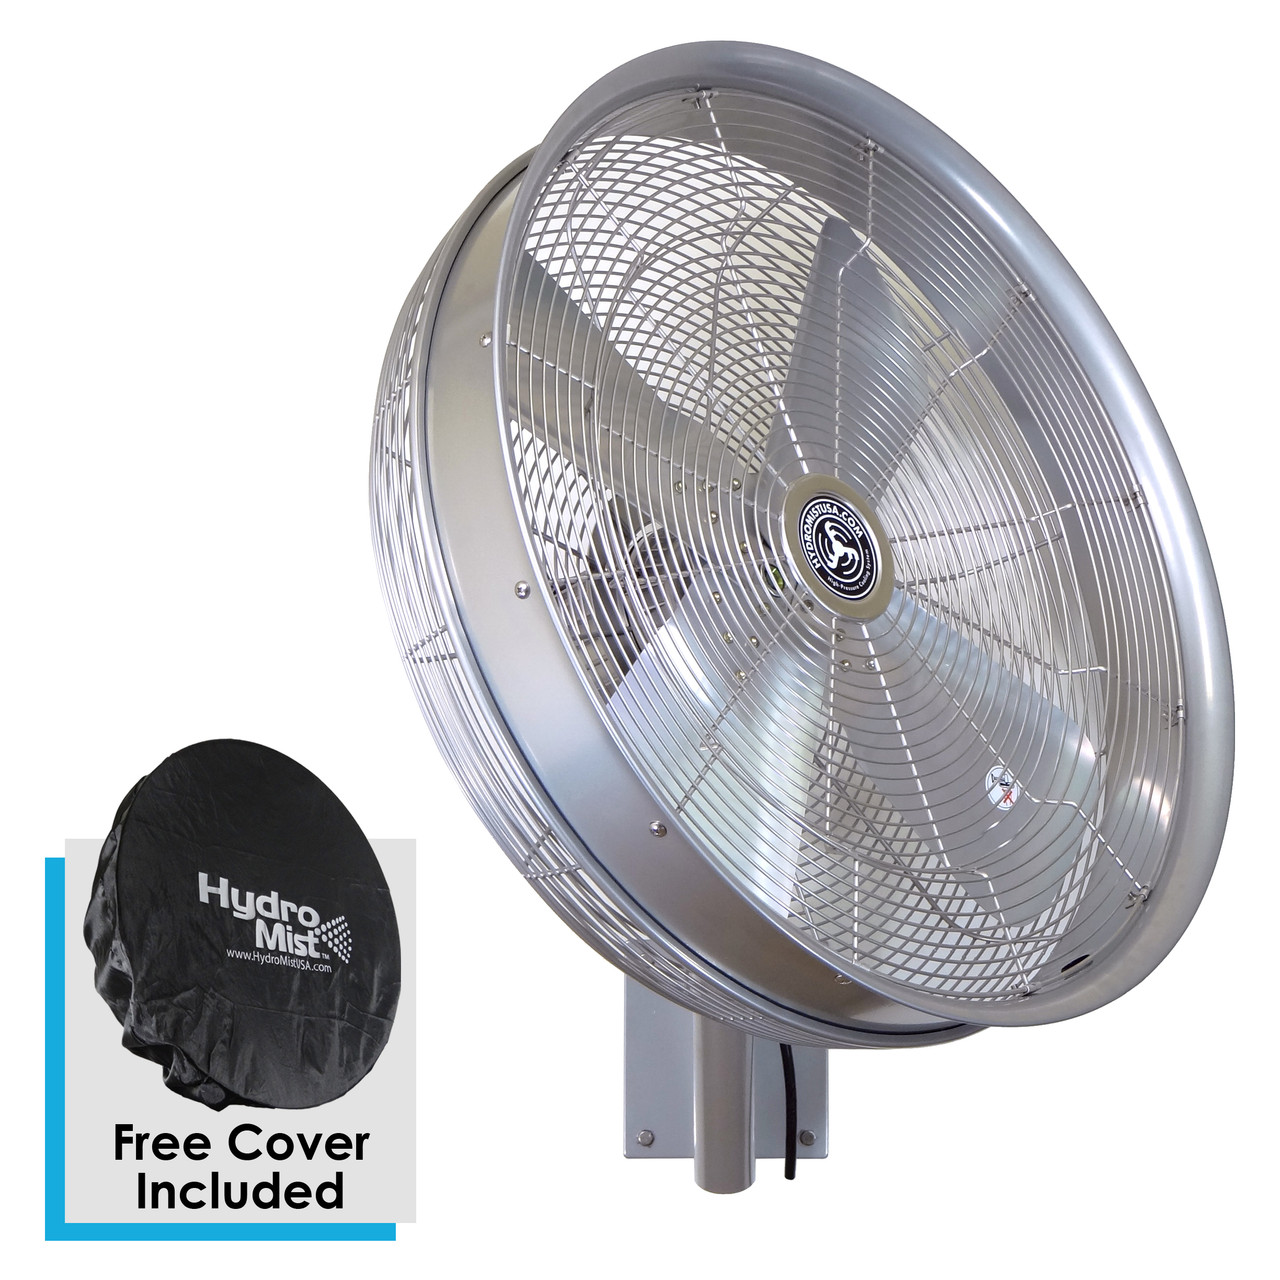 24" Shrouded Misting Fan w/Motor Control (1000 PSI pump and 3/8 high pressure hose required)